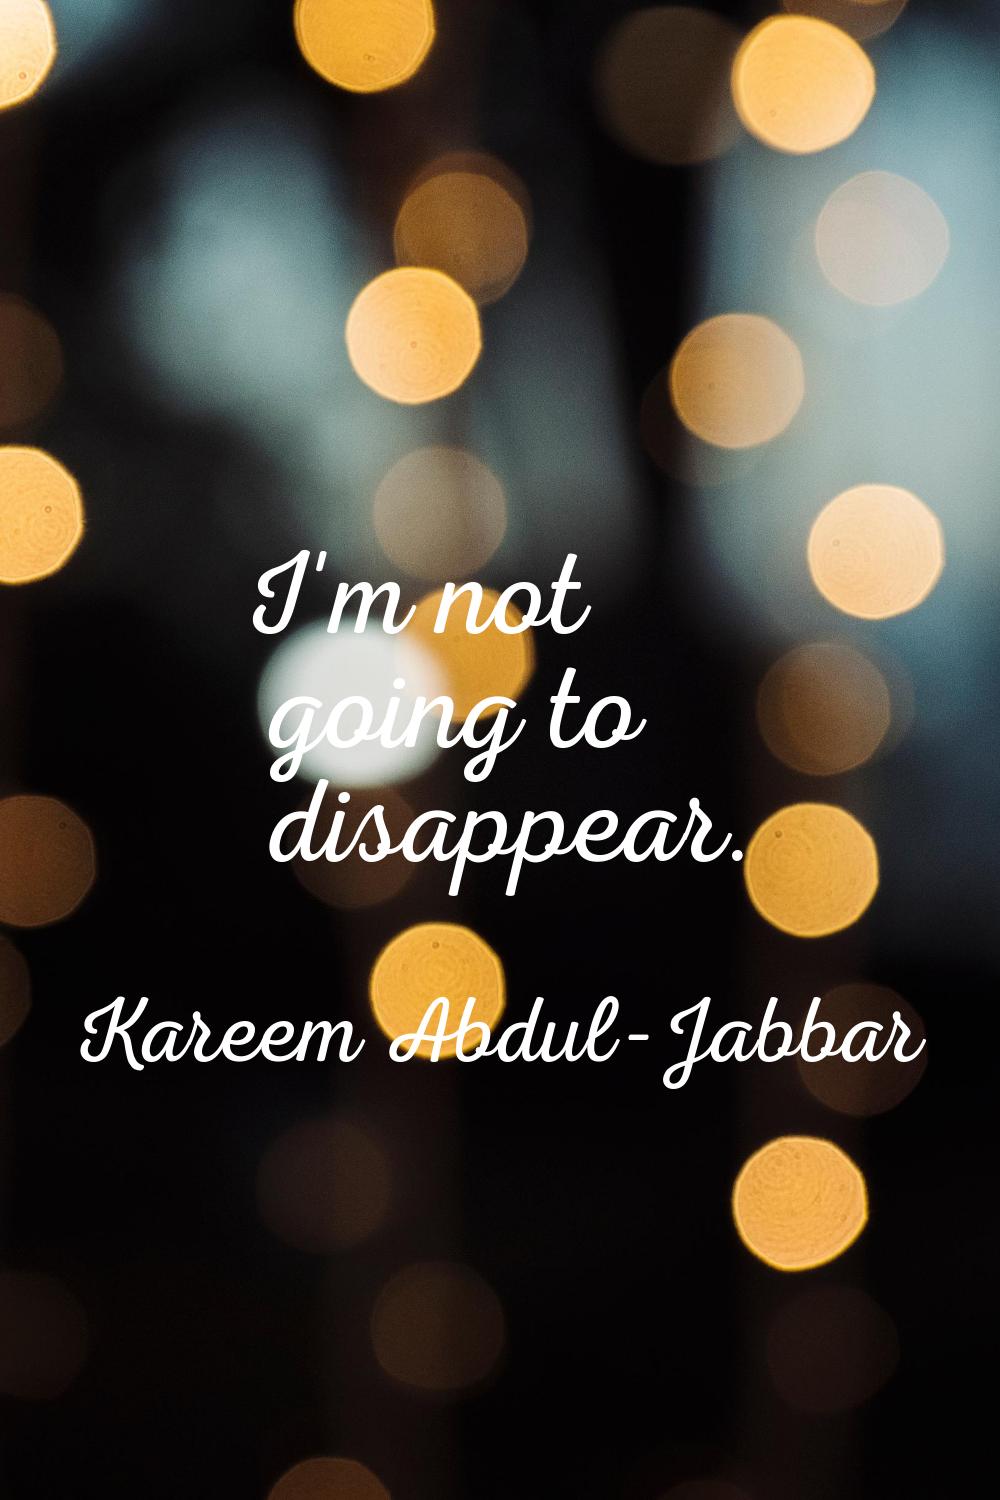 I'm not going to disappear.